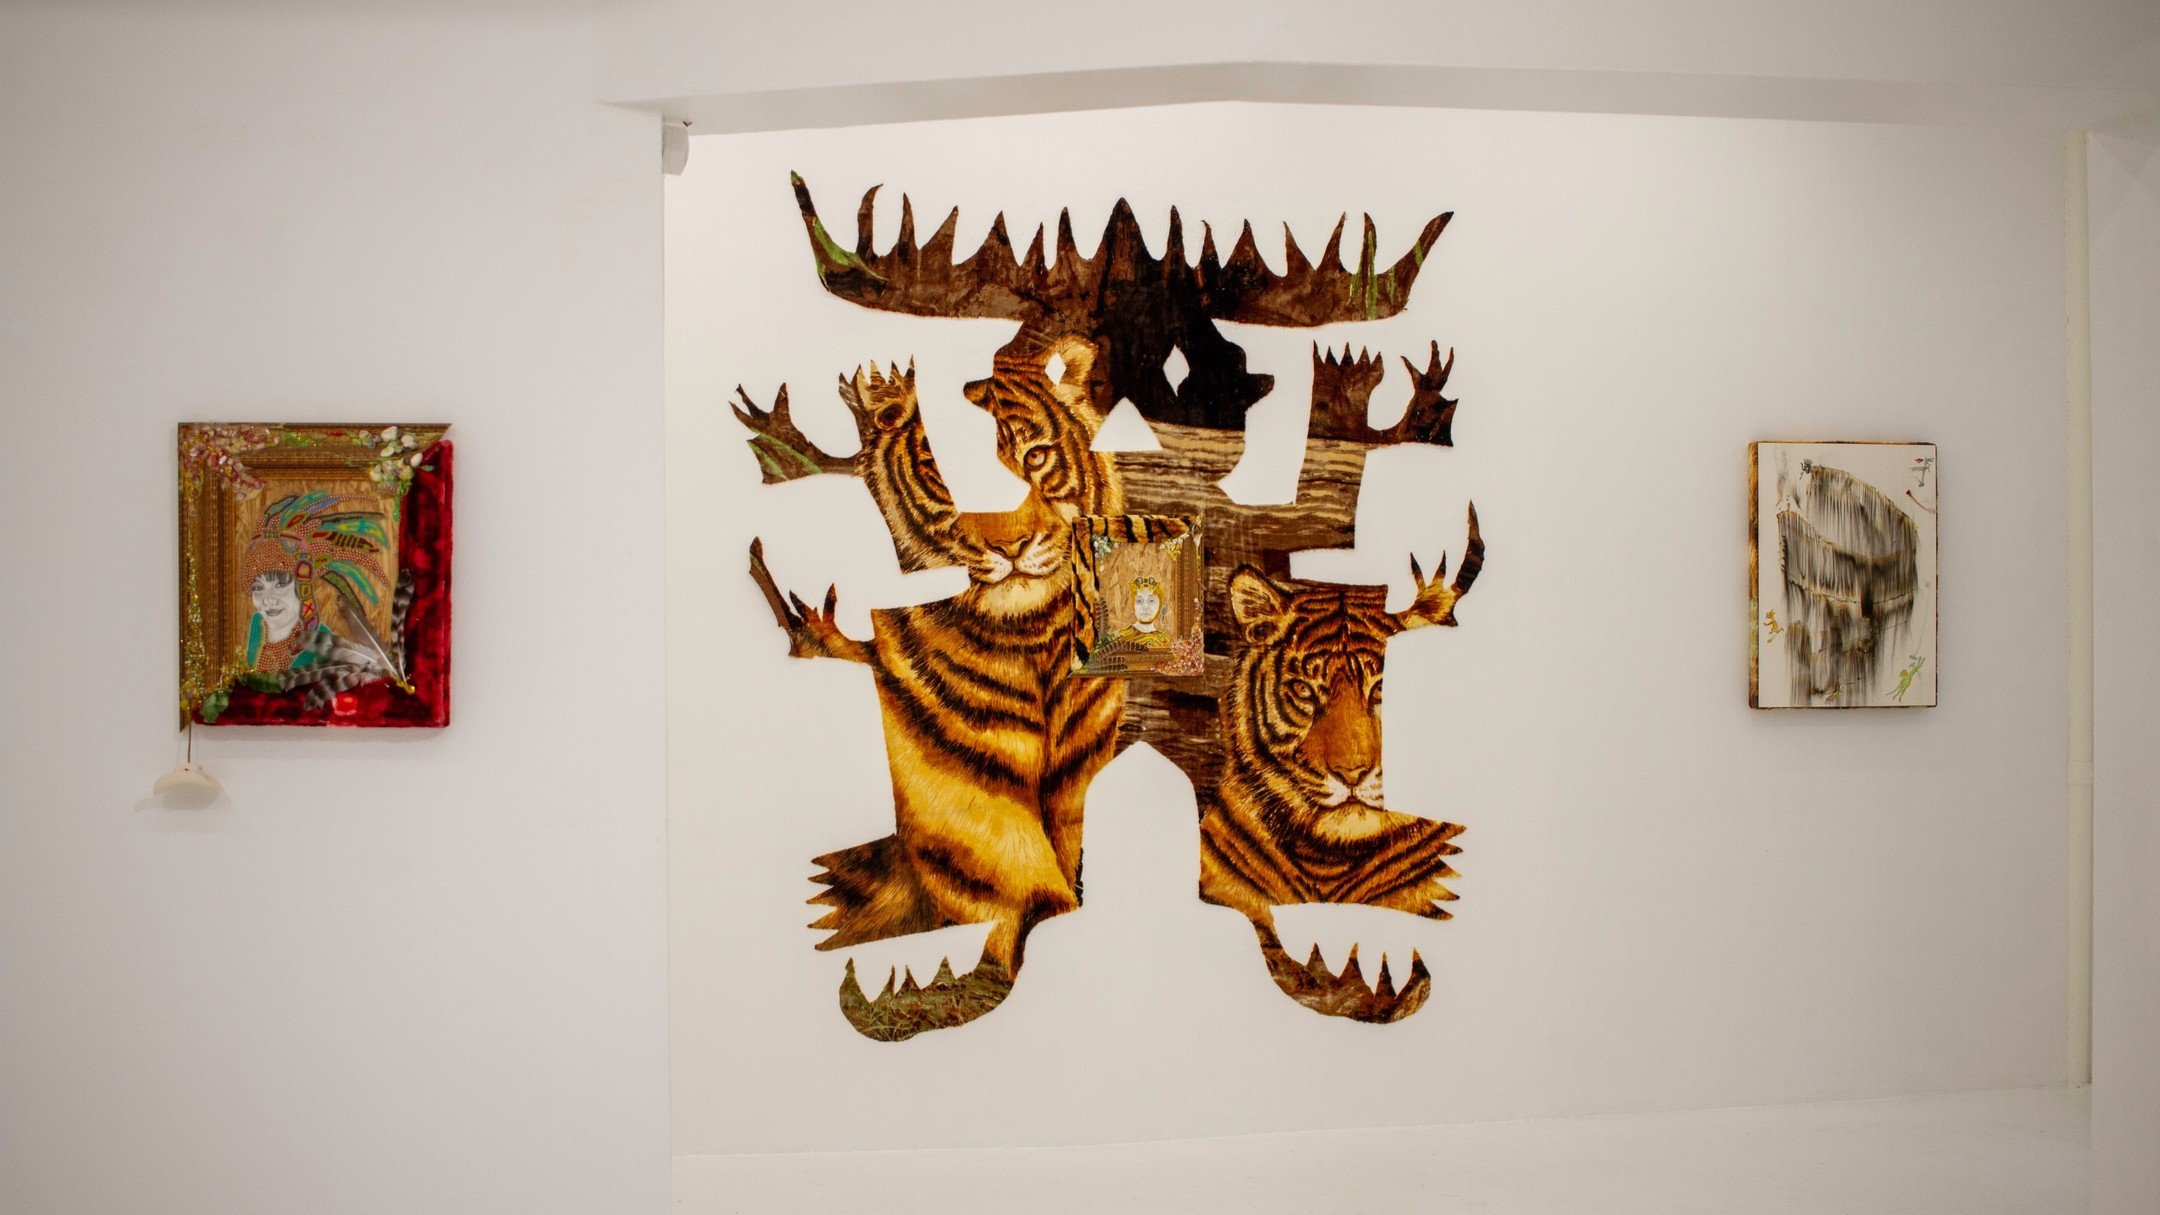 NOW ON VIEW: Luis Sahagun, La Magia del Pueblo through June 9 As a practitioner of Curanderismo, a healing practice found in the indigenous cultures of Mexico, Sahagun transforms the gallery to a spiritual experience. This inclusion functions as a he